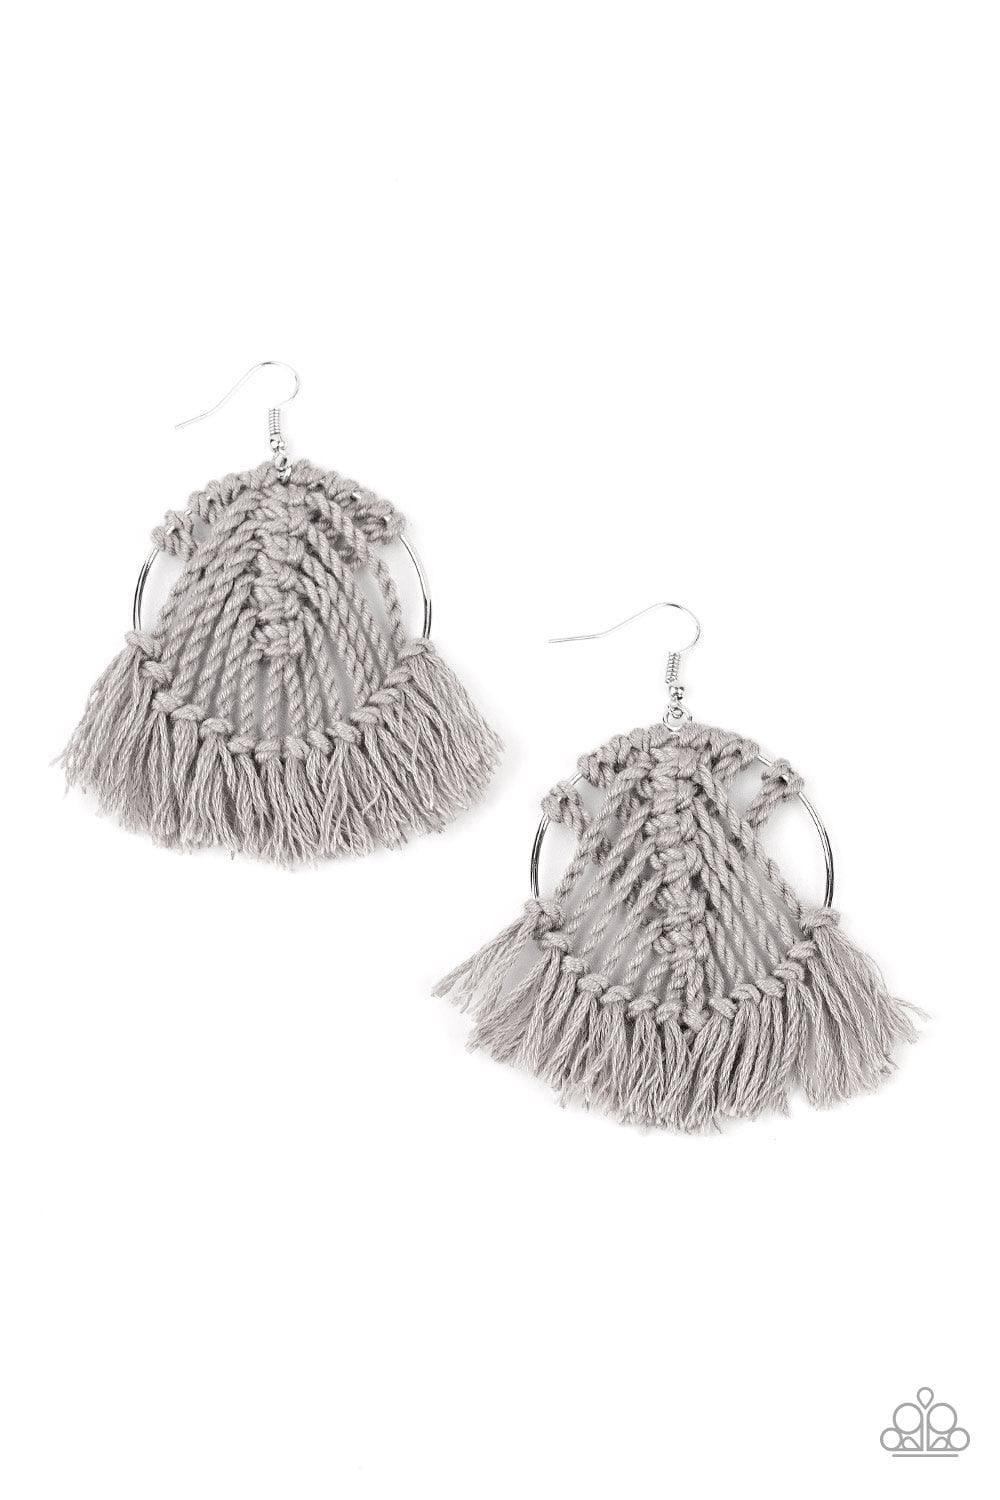 Paparazzi Accessories - All About Macrame - Silver Earrings - Bling by JessieK